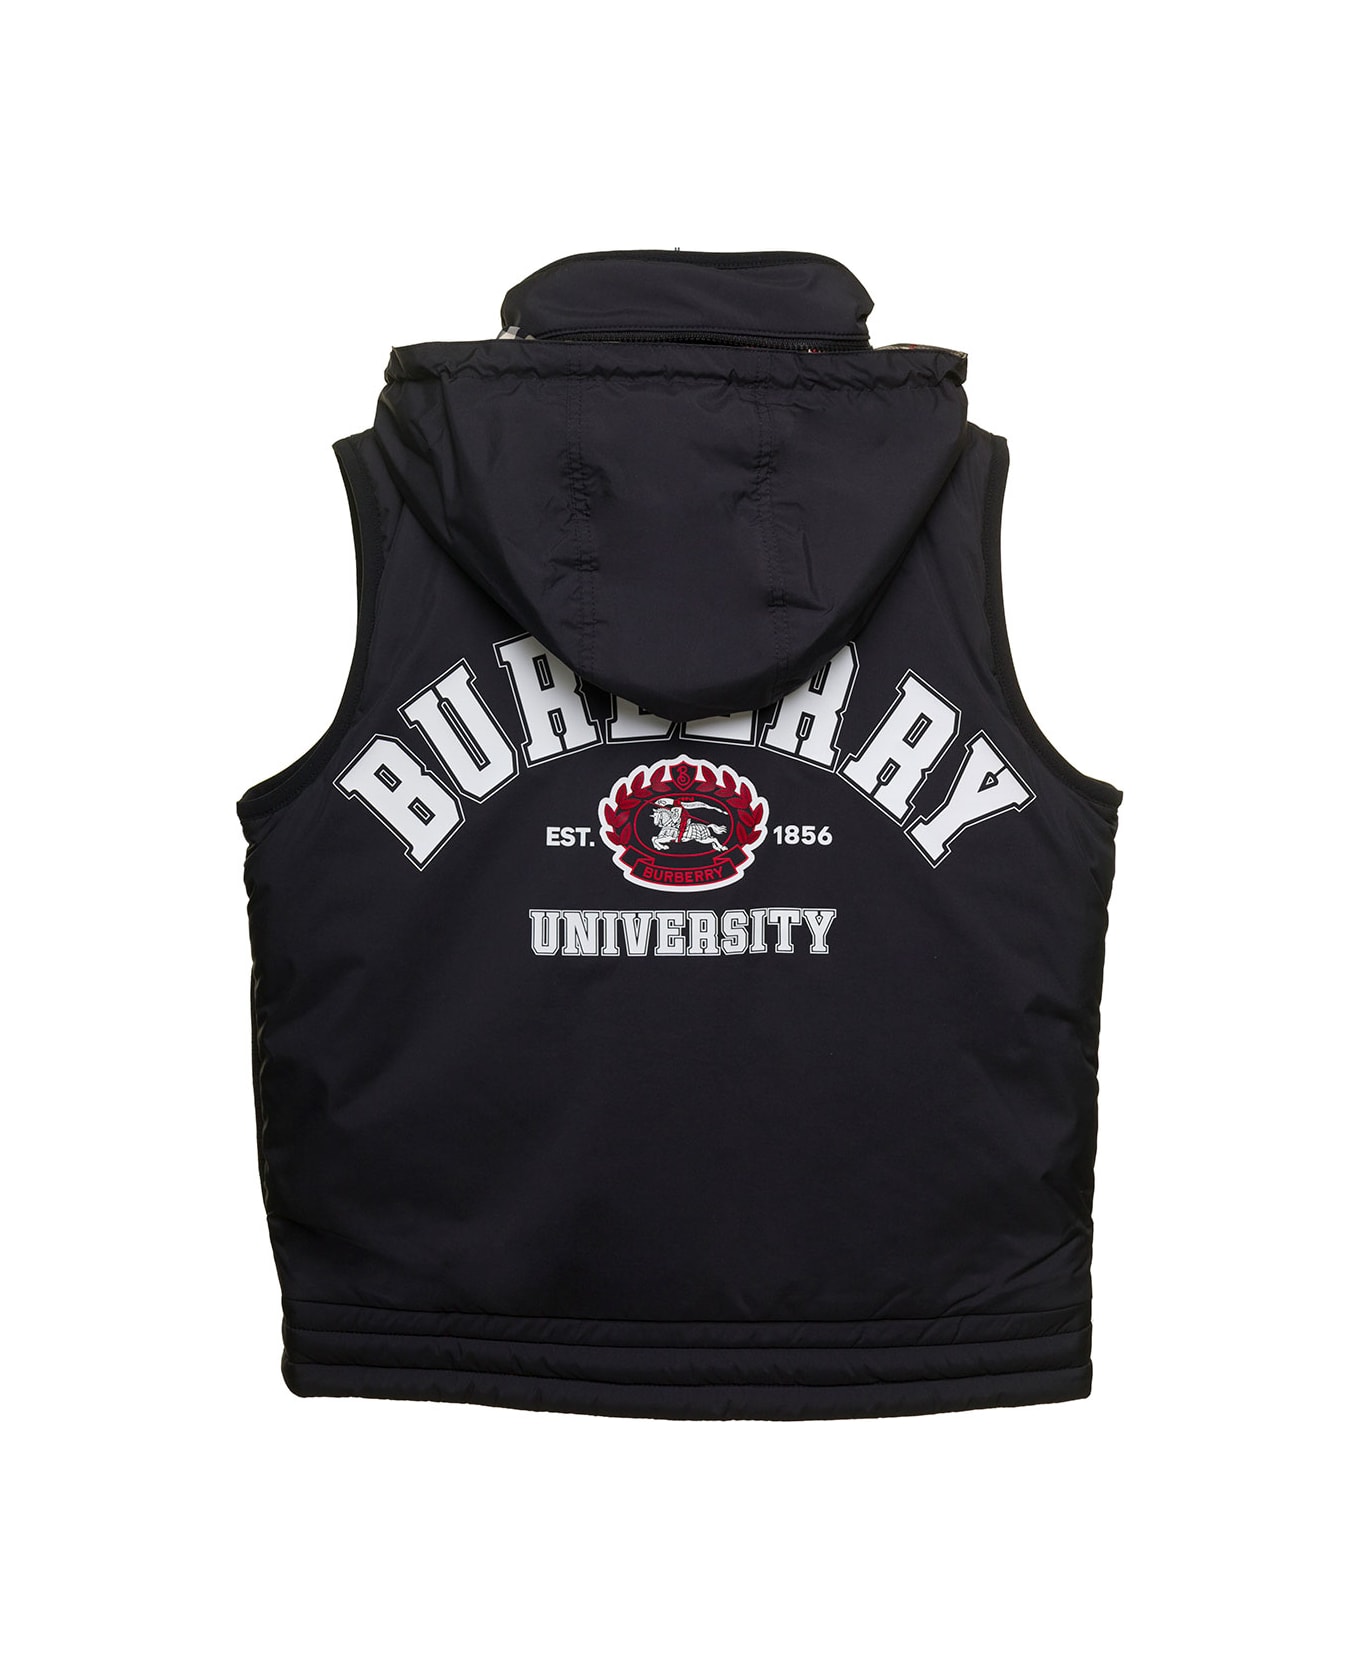 Burberry Black Quilted Hooded Vest With College-style Logo Print In Nylon Boy - Black